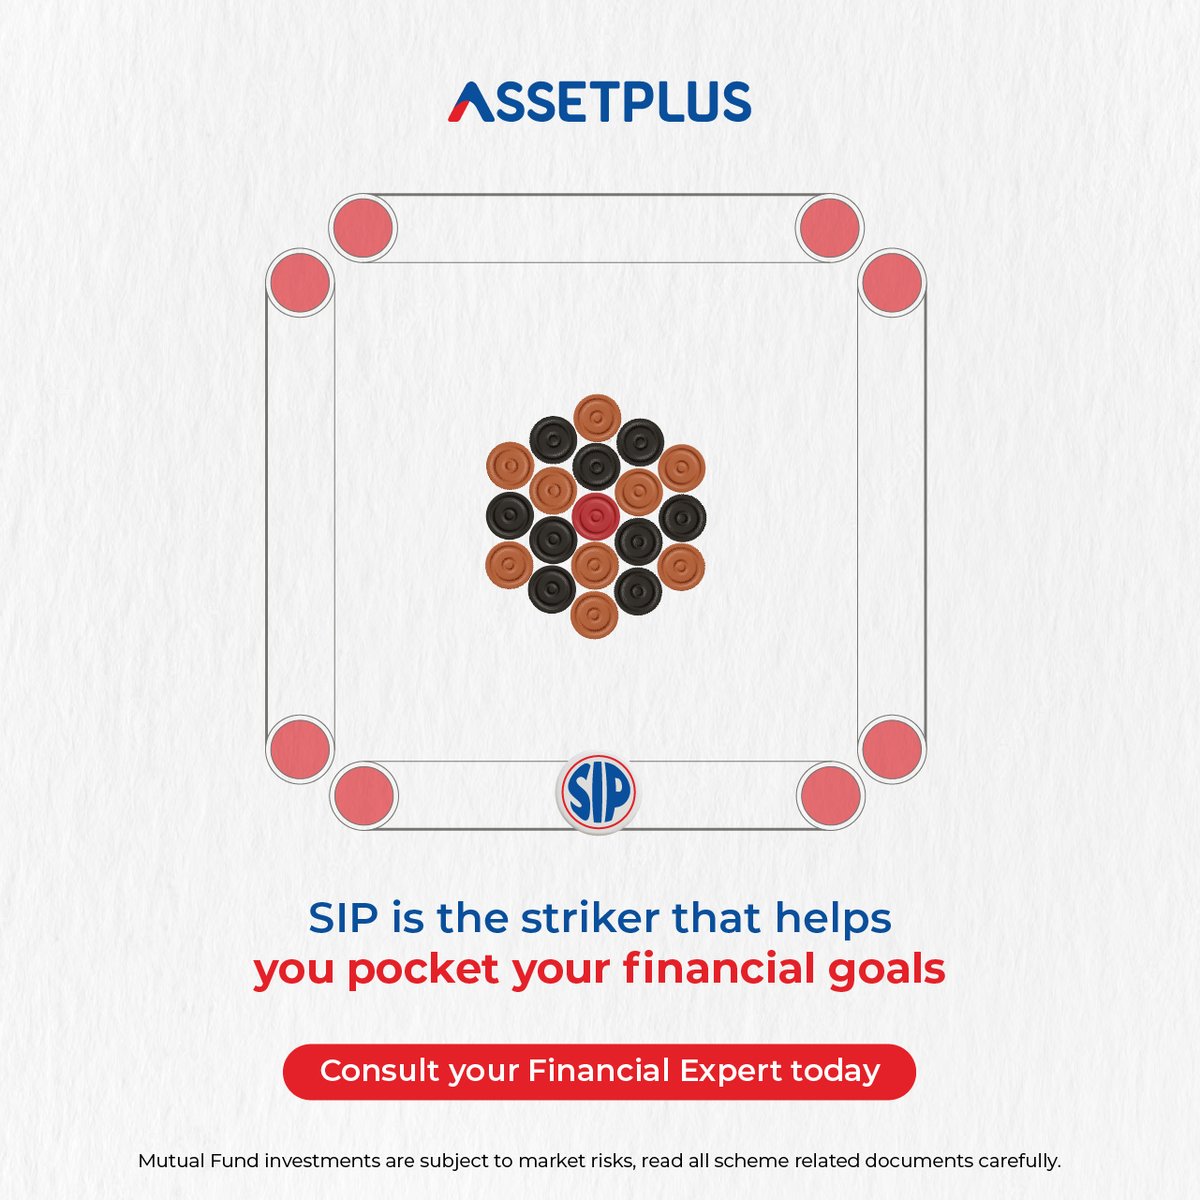 SIP acts like the striker in a carrom board game, propelling your financial goals into the pockets of success. Investing diligently in SIPs can help you reach your financial objectives accurately and consistently.

#SIP #financialgoal #carromboard